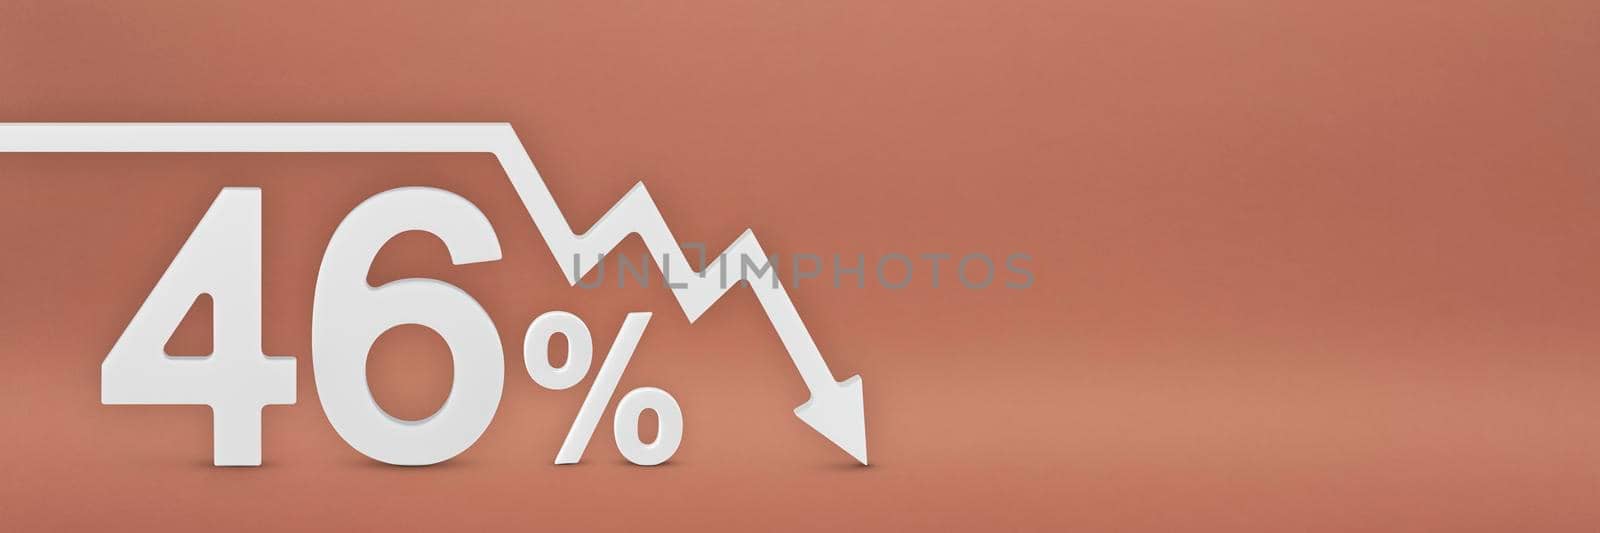 forty-six percent, the arrow on the graph is pointing down. Stock market crash, bear market, inflation.Economic collapse, collapse of stocks.3d banner,46 percent discount sign on a red background